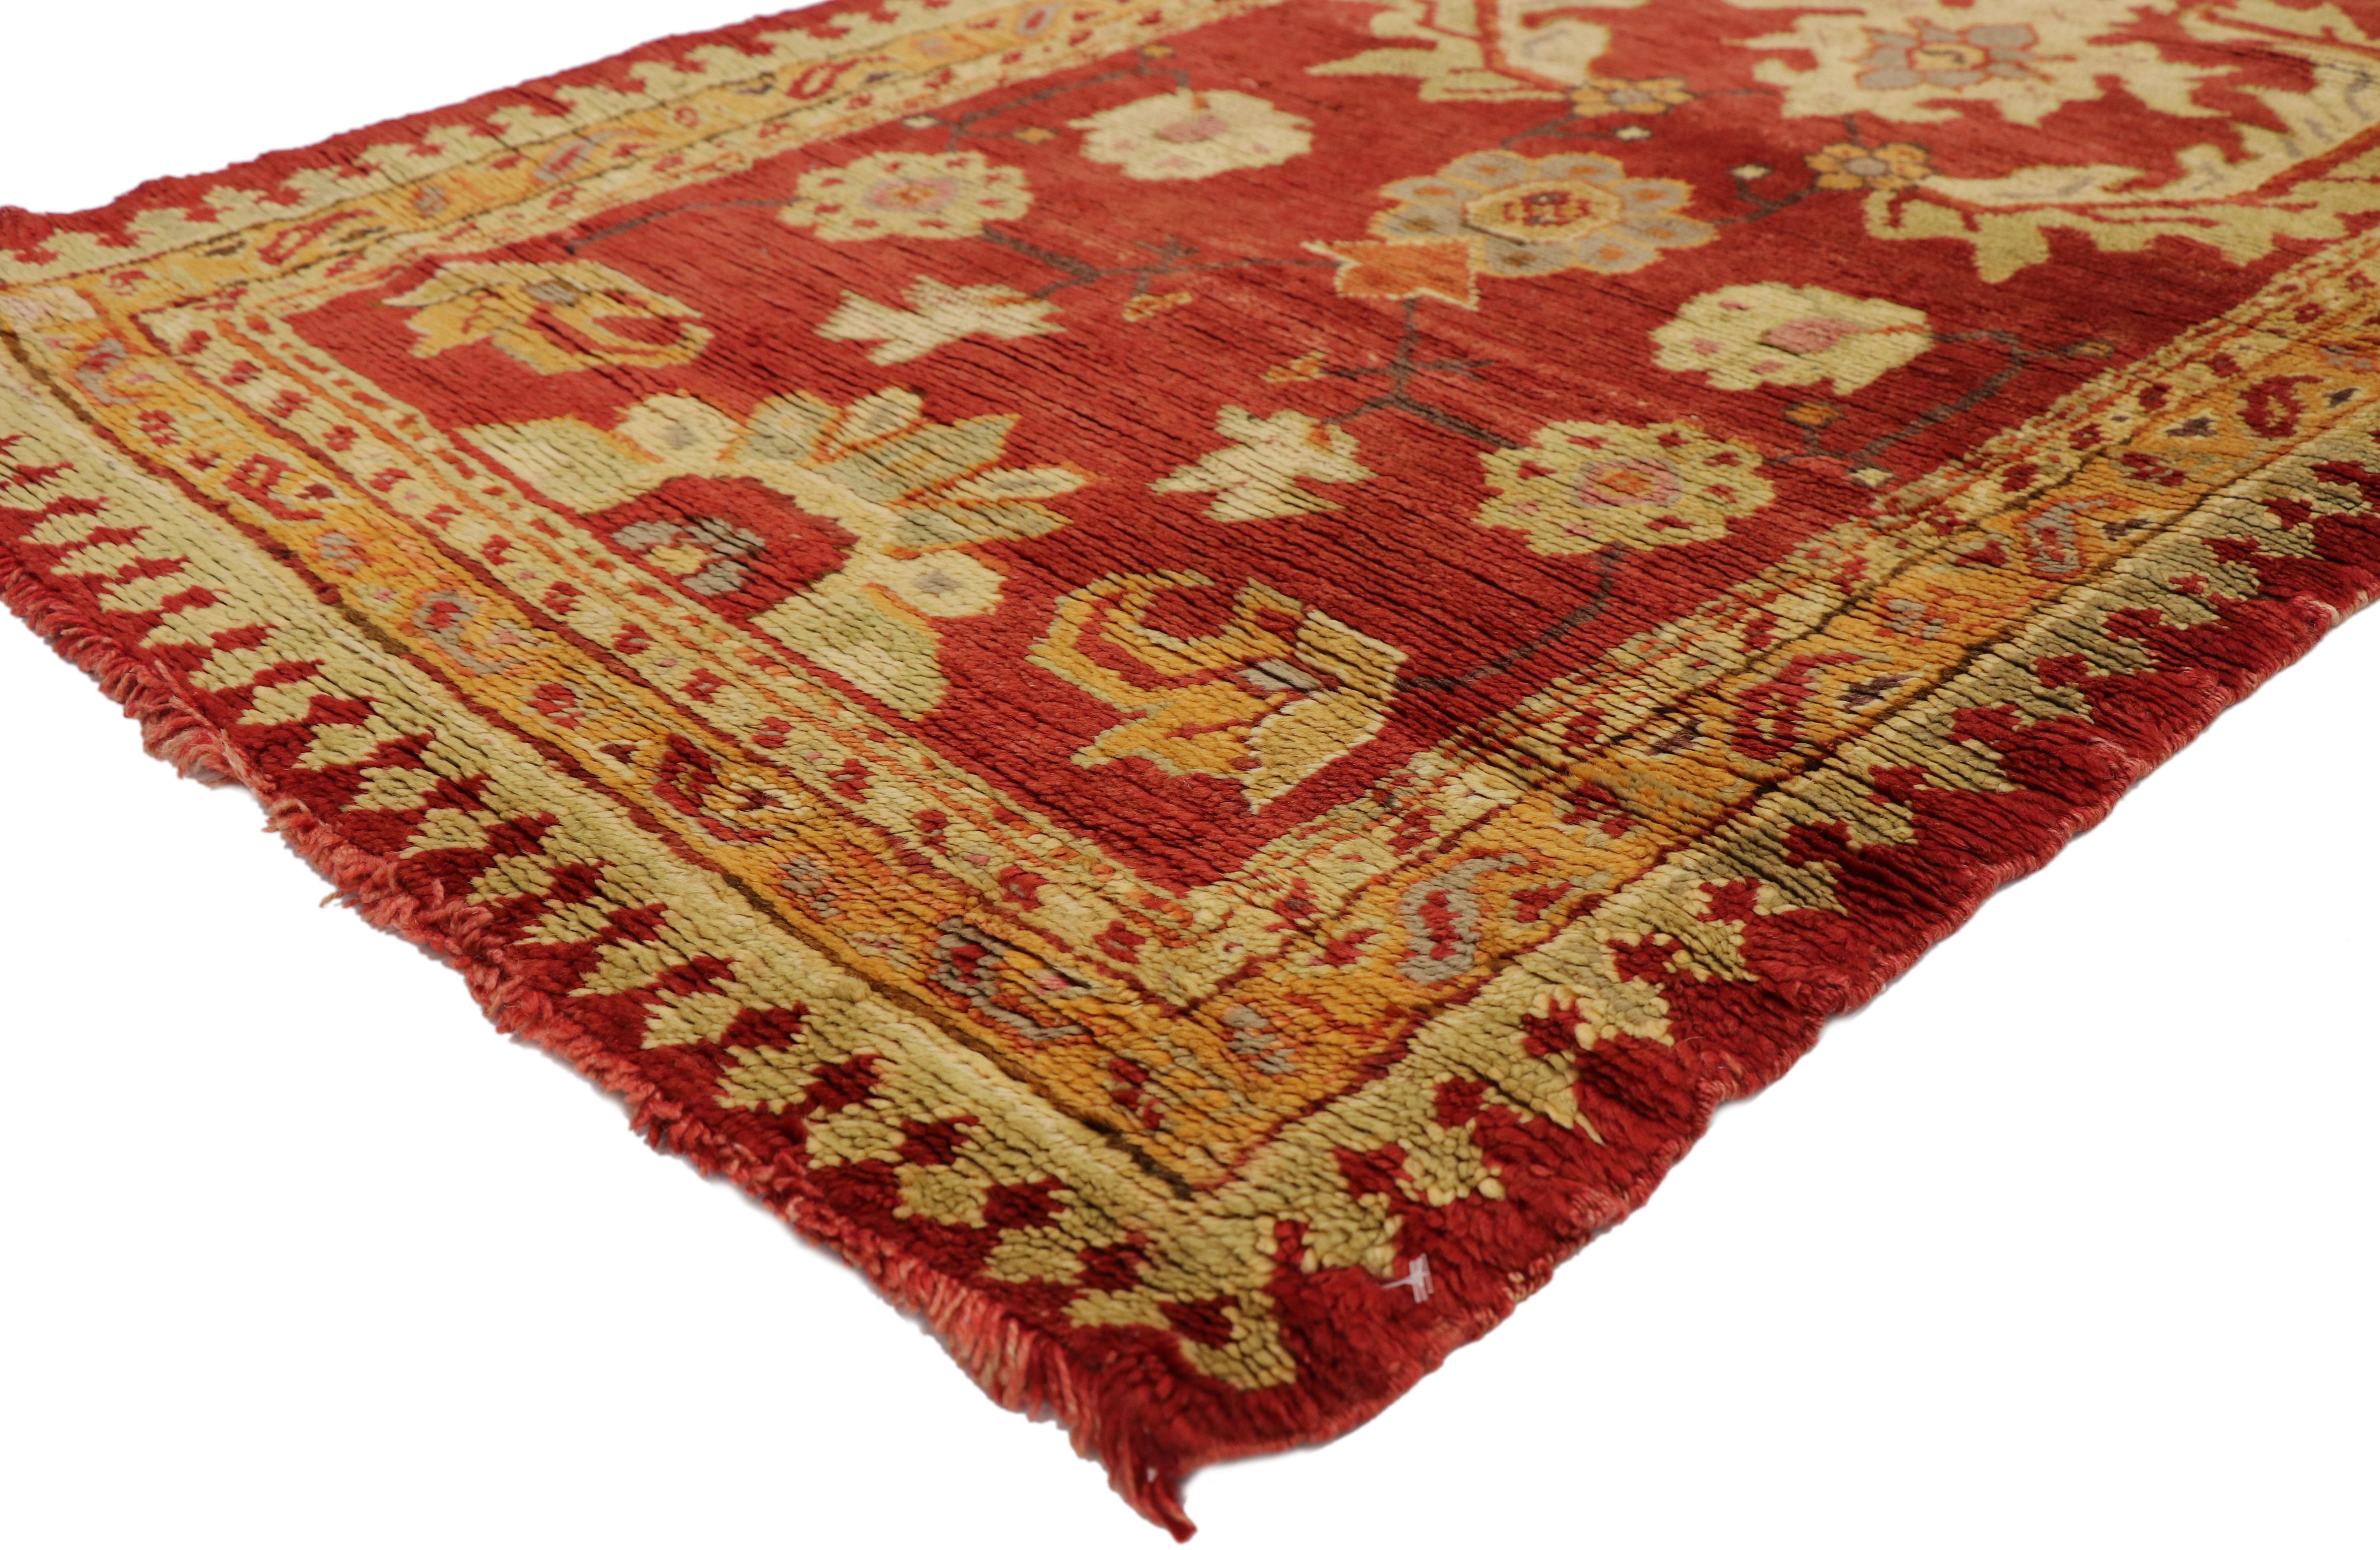 74016 Vintage Turkish Oushak Runner with English Manor House Tudor Style. Full of character and stately presence, this vintage Turkish Oushak carpet runner showcases an extravagant geometric design reflecting a modern traditional style. Rendered in